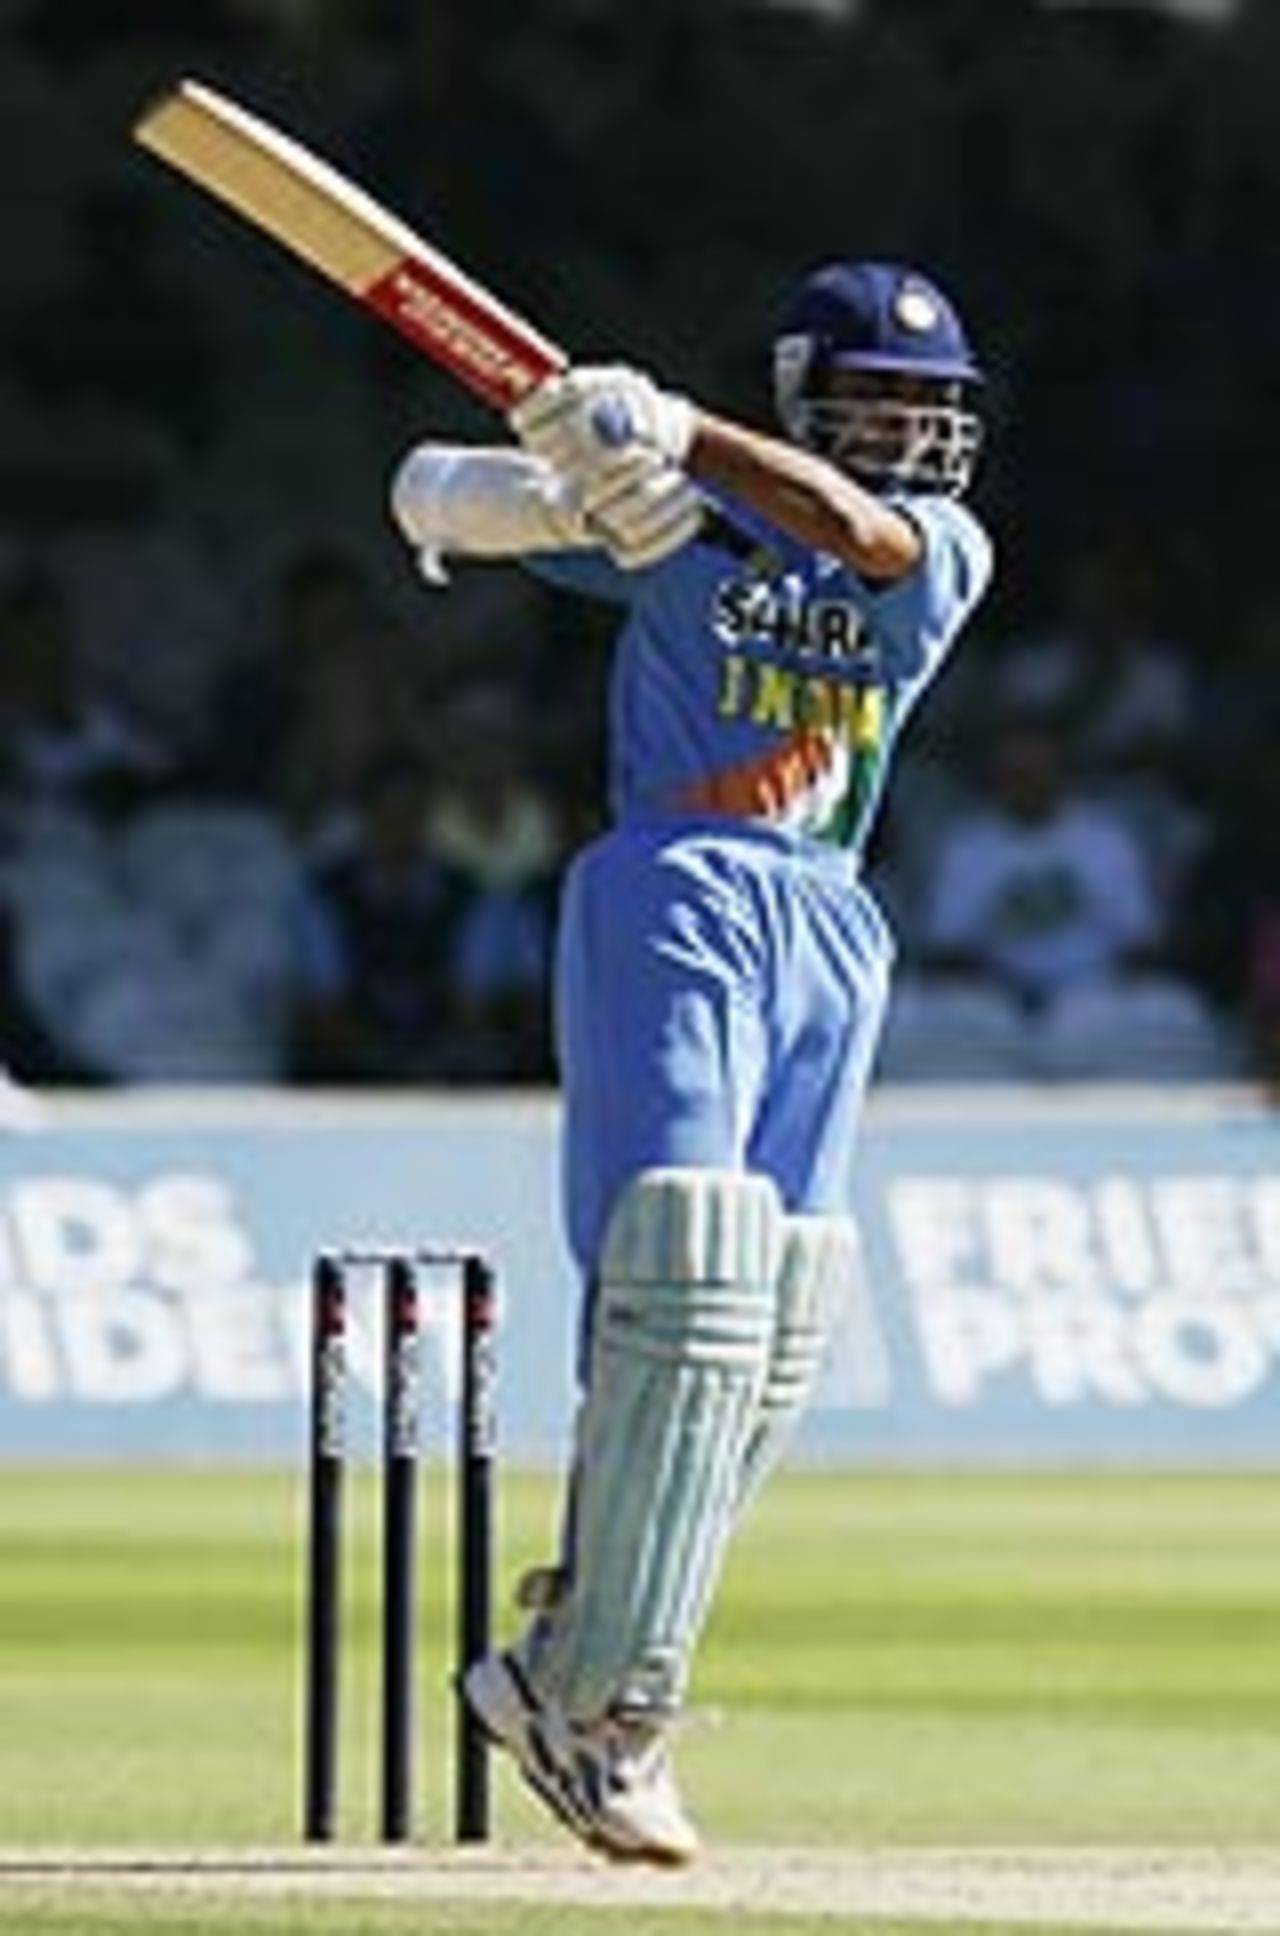 Sourav Ganguly's 90 was the matchwinning performance for India at Lord's, England v India, 3rd ODI, NatWest Challenge, September 5 2004